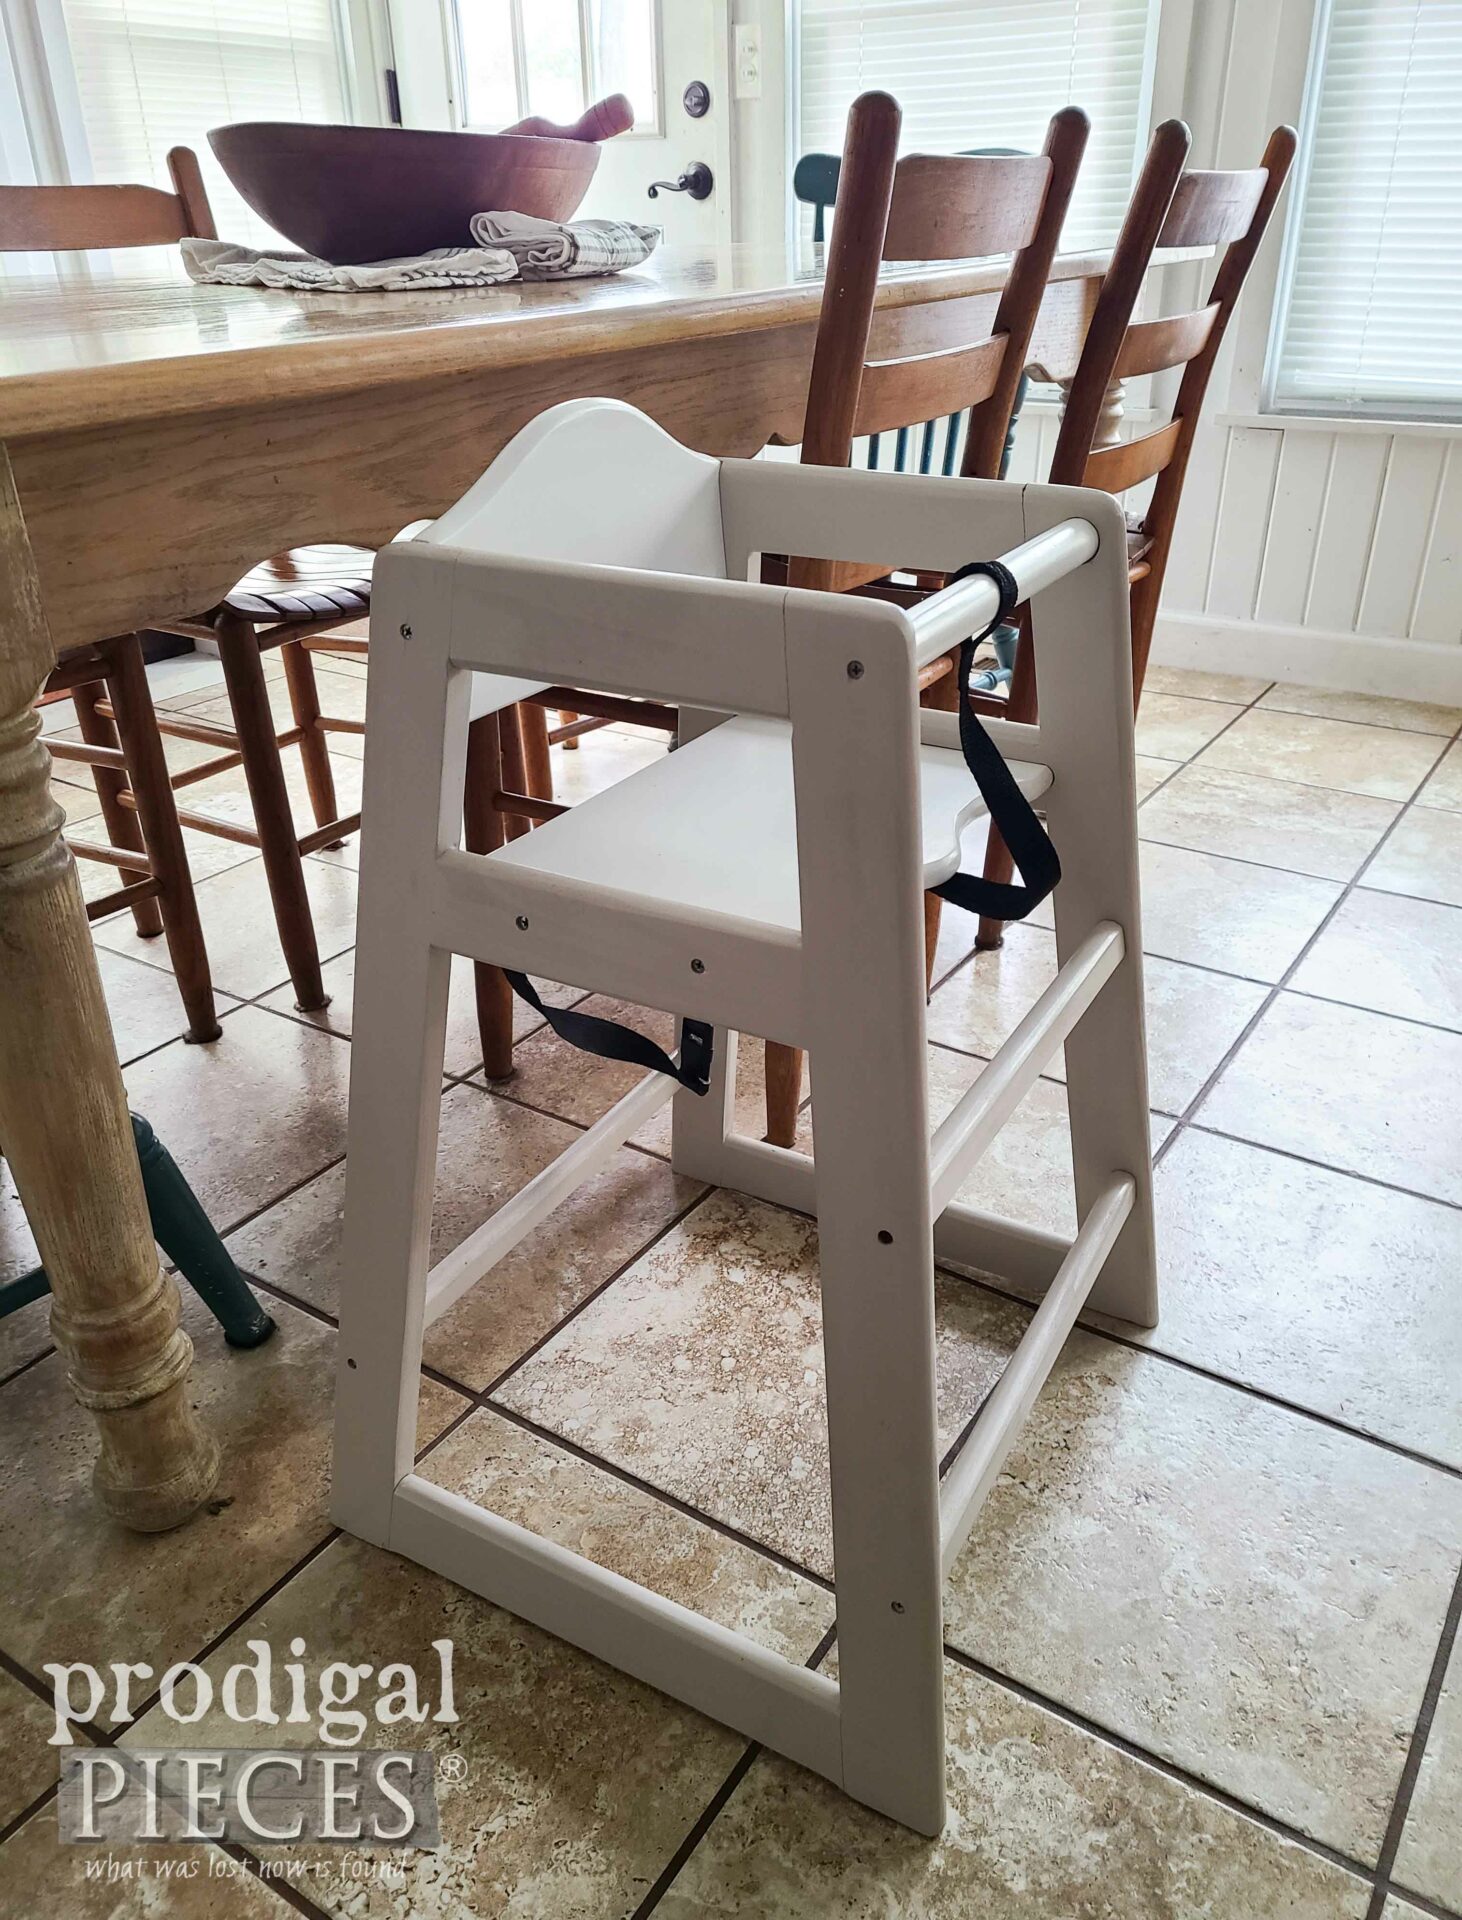 Modern Farmhouse Wooden DIY Painted Highchair by Larissa of Prodigal Pieces | prodigalpieces.com #prodigalpieces #dining #baby